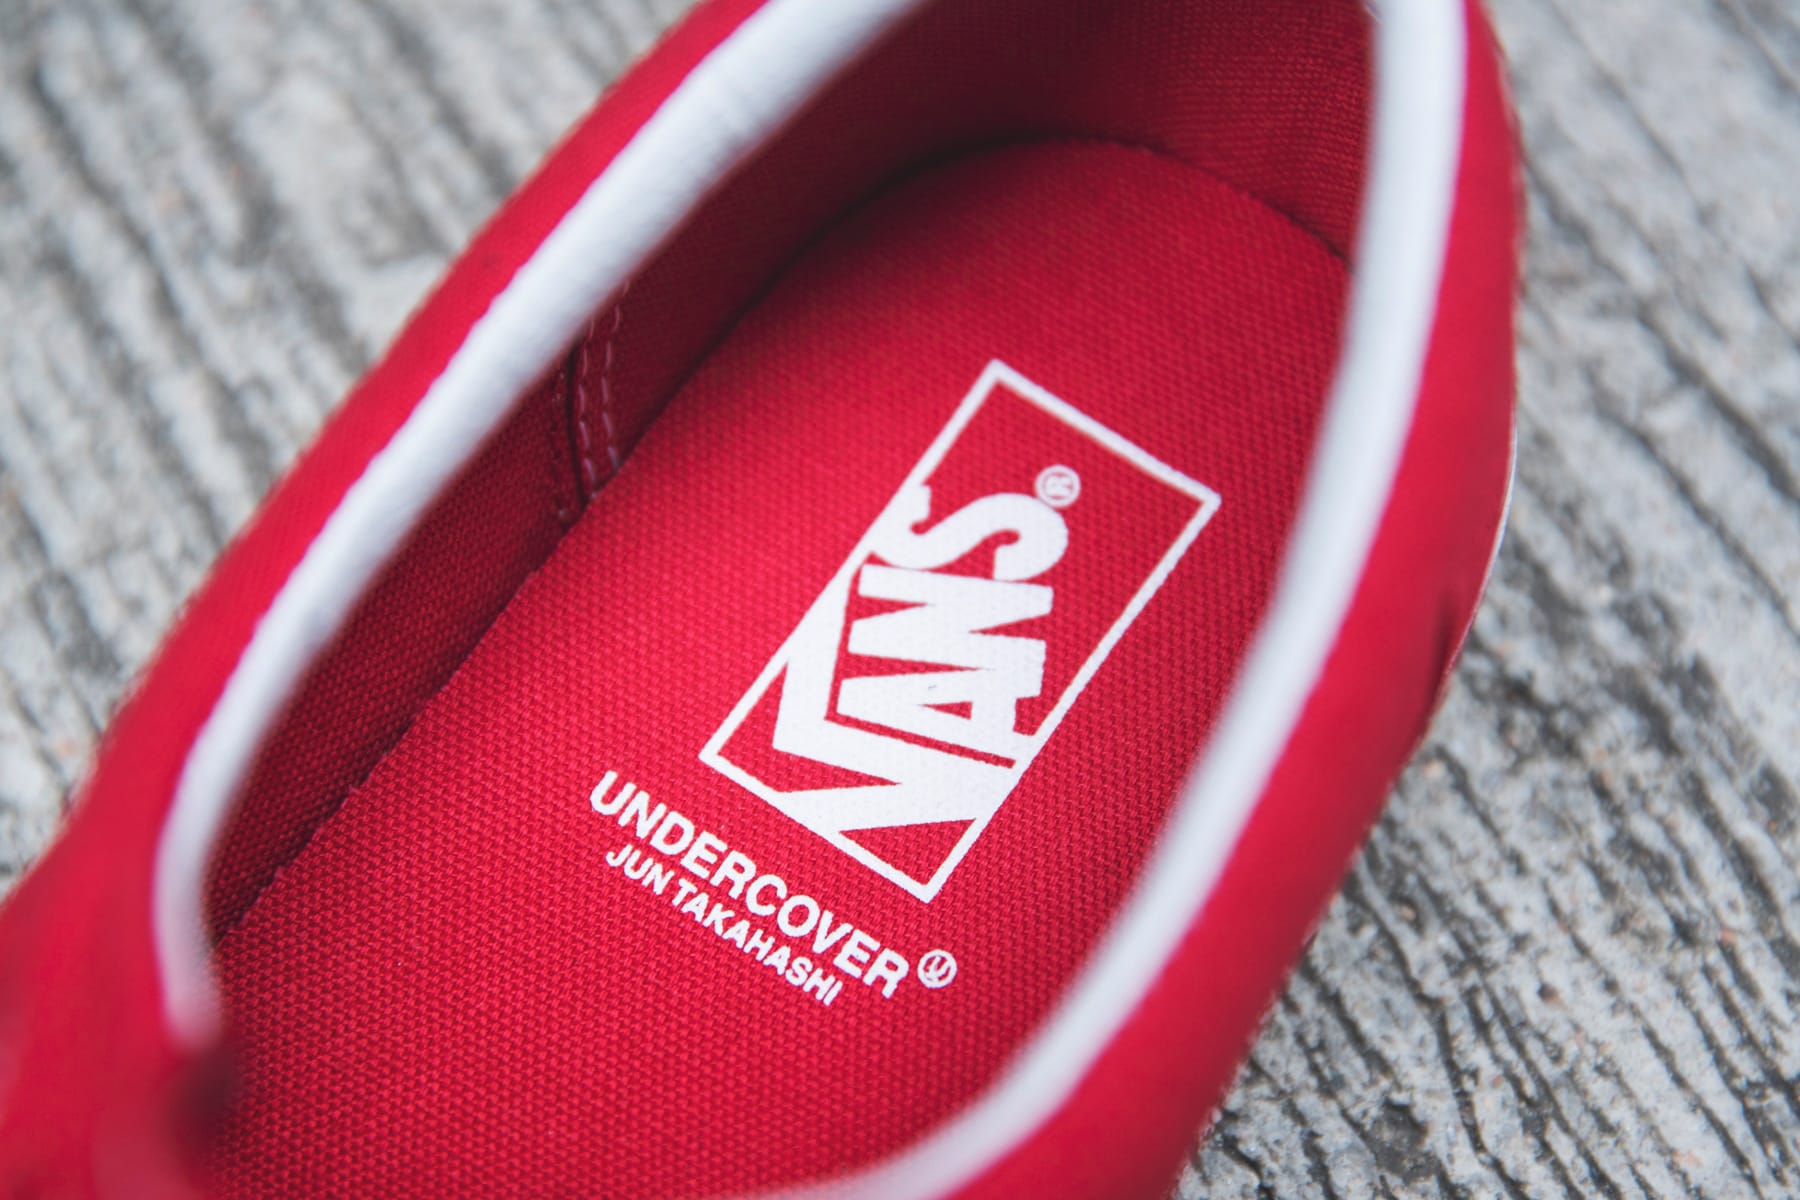 Check out the UNDERCOVER x Vans Collaboration | Hypebeast